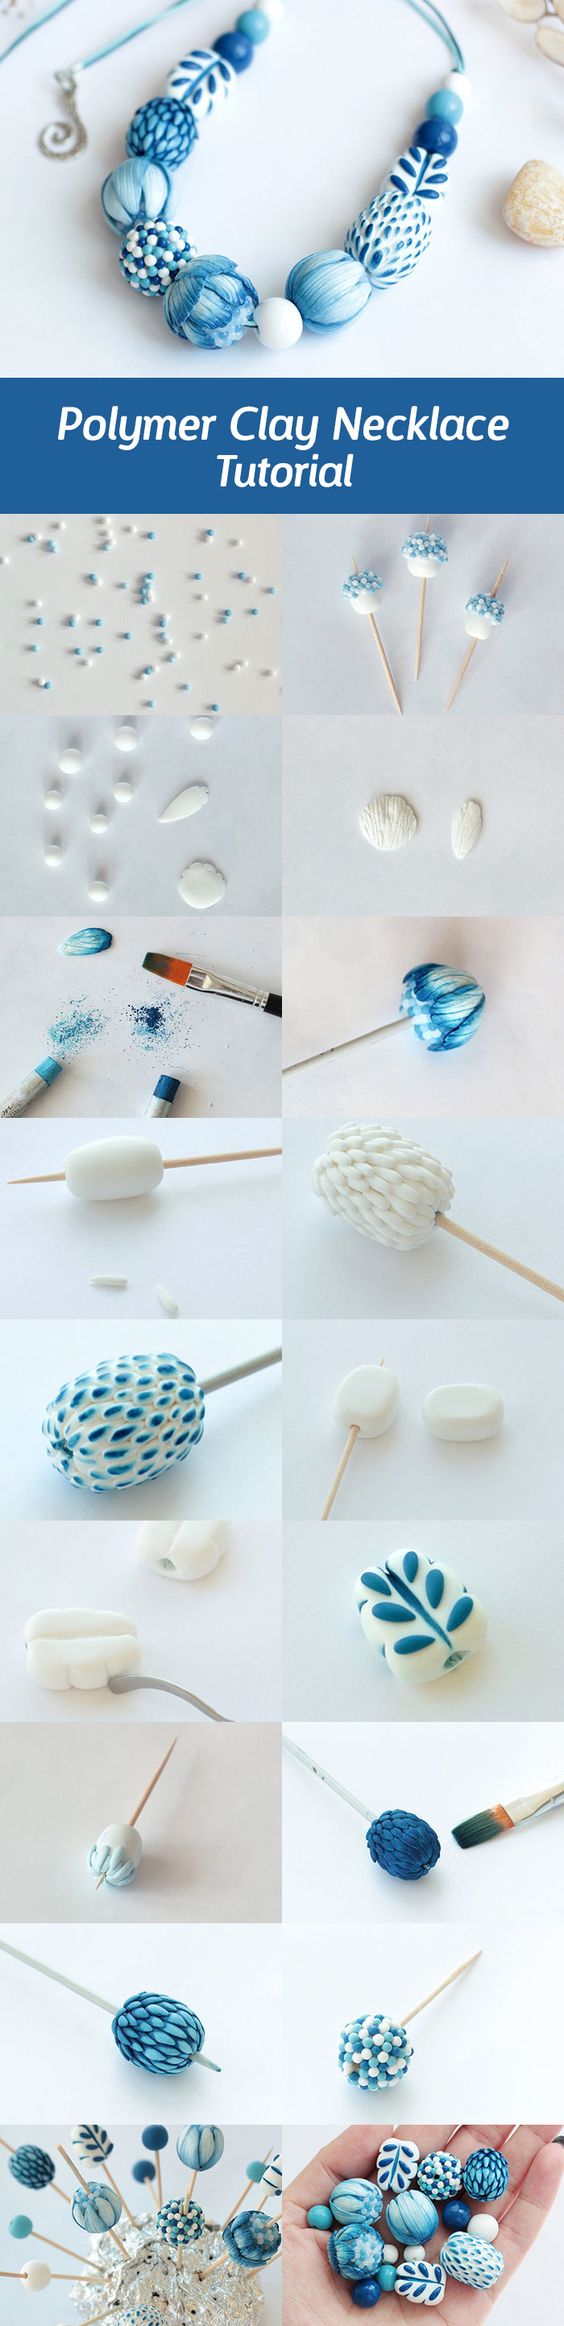 polymer clay white and blue necklace DIY tutorial - step by step fimo